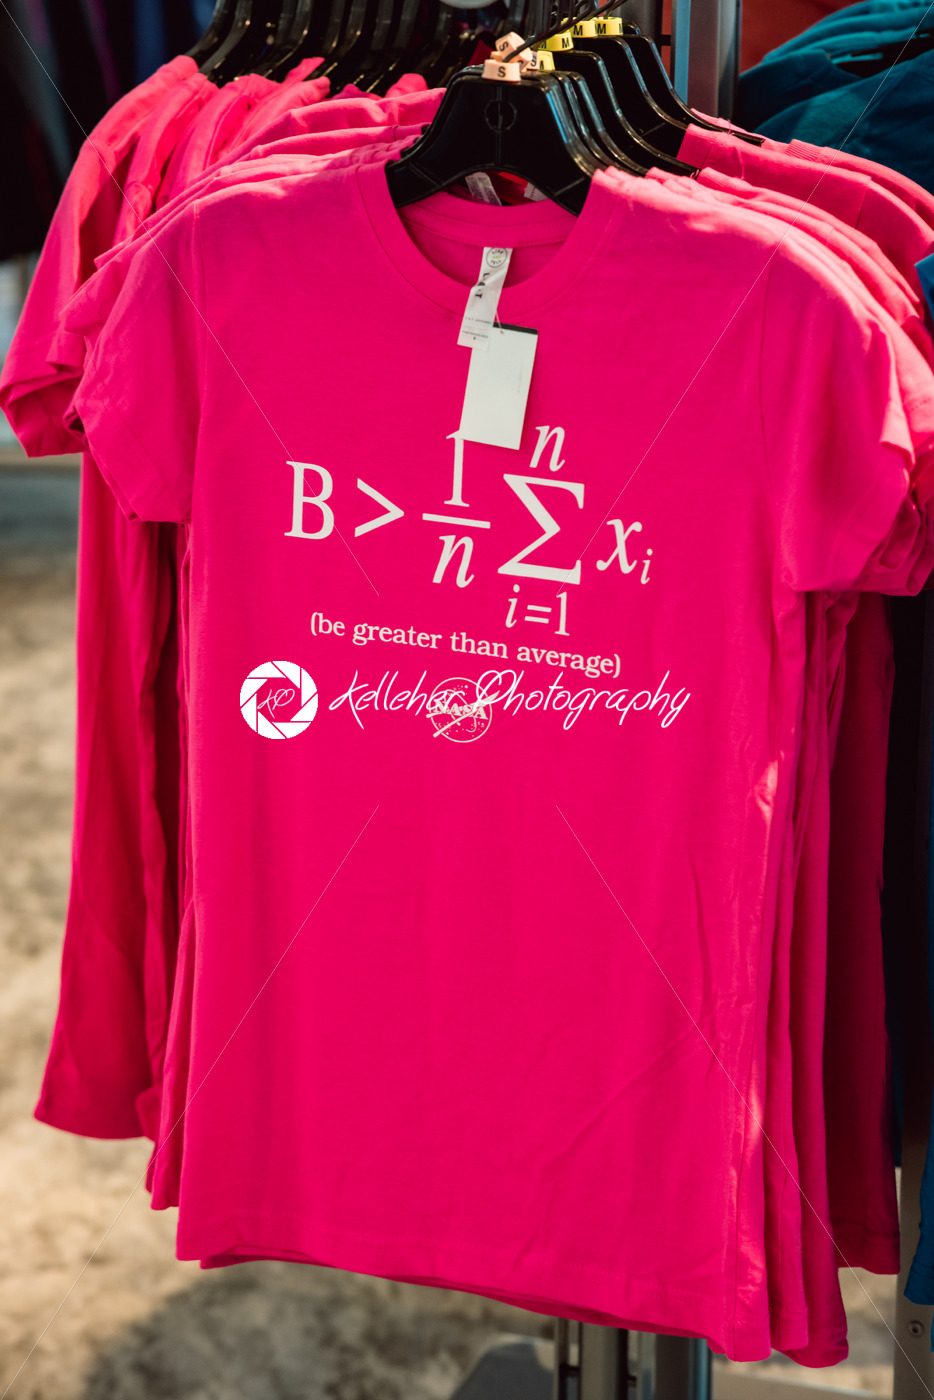 Cape Canaveral, Florida – August 13, 2018: Be greater than average equation shirt at NASA Kennedy Space Center - Kelleher Photography Store